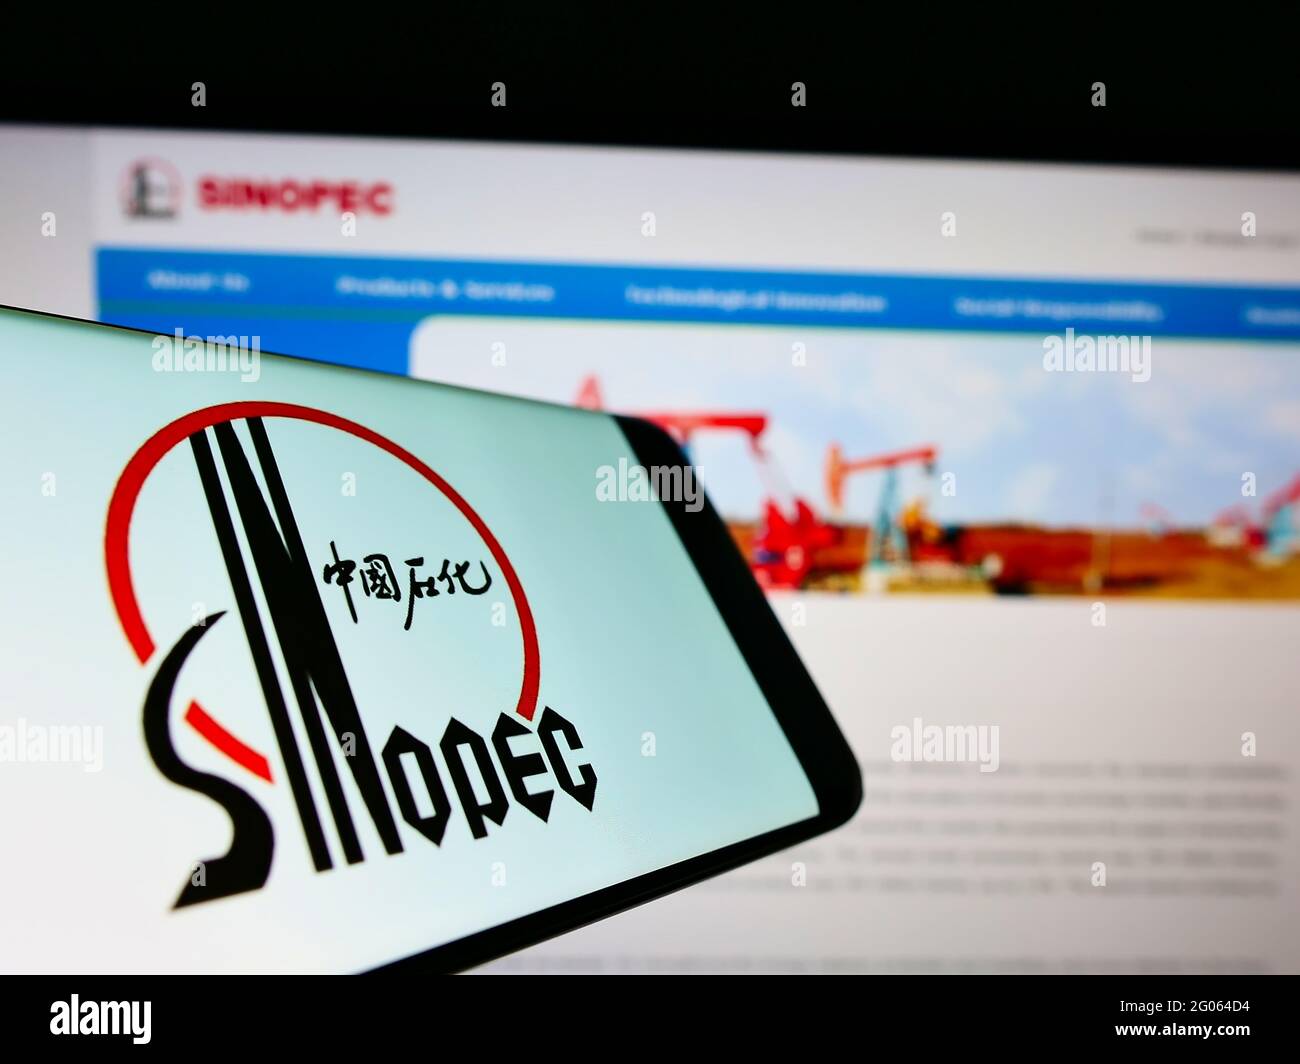 Smartphone with logo of company China Petrochemical Corporation (Sinopec) on screen in front of web page. Focus on center-right of phone display. Stock Photo